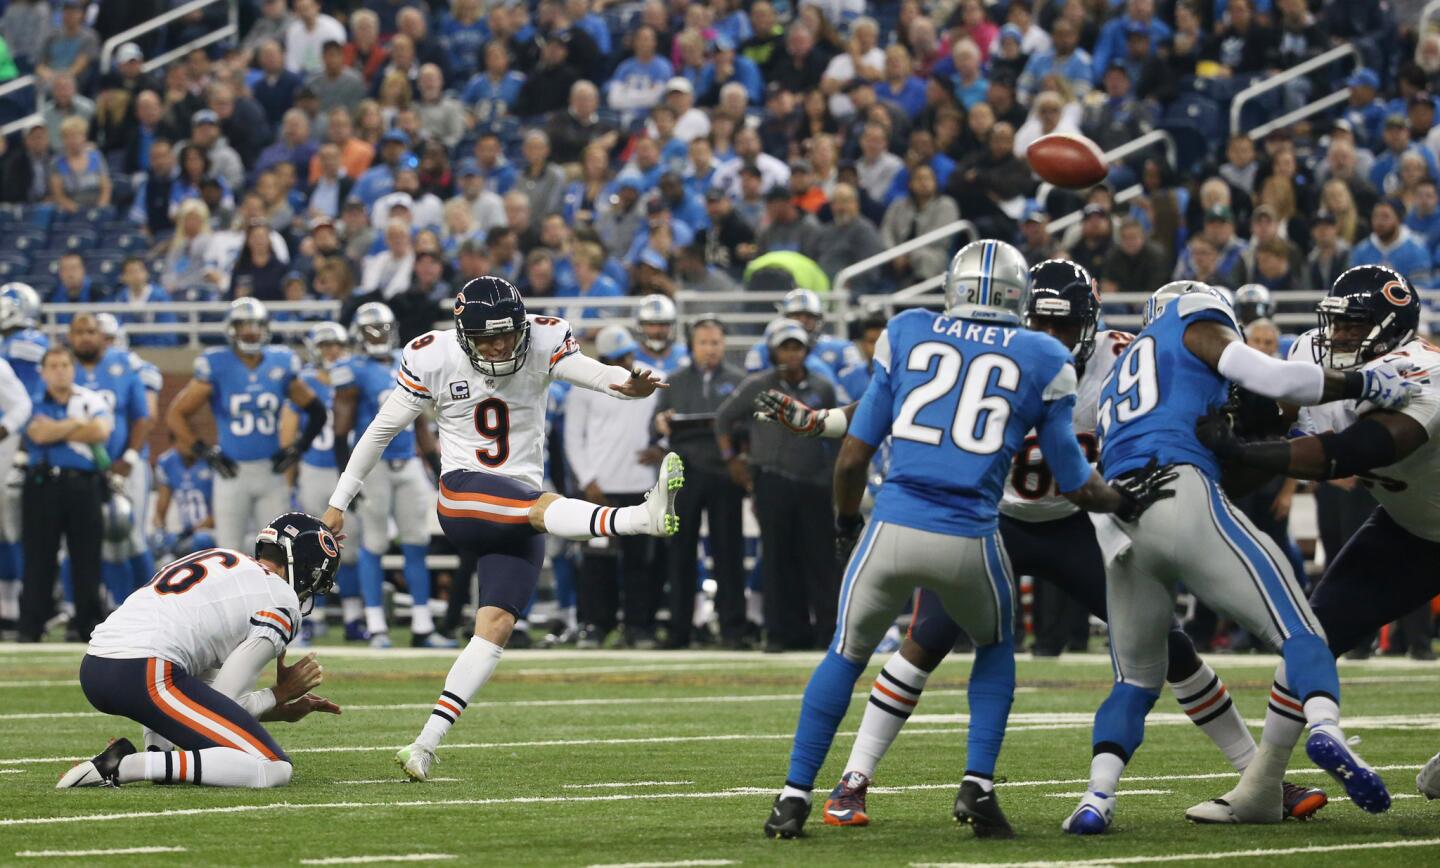 Robbie Gould kicks a field goal in the first quarter against the Lions at Ford Field.